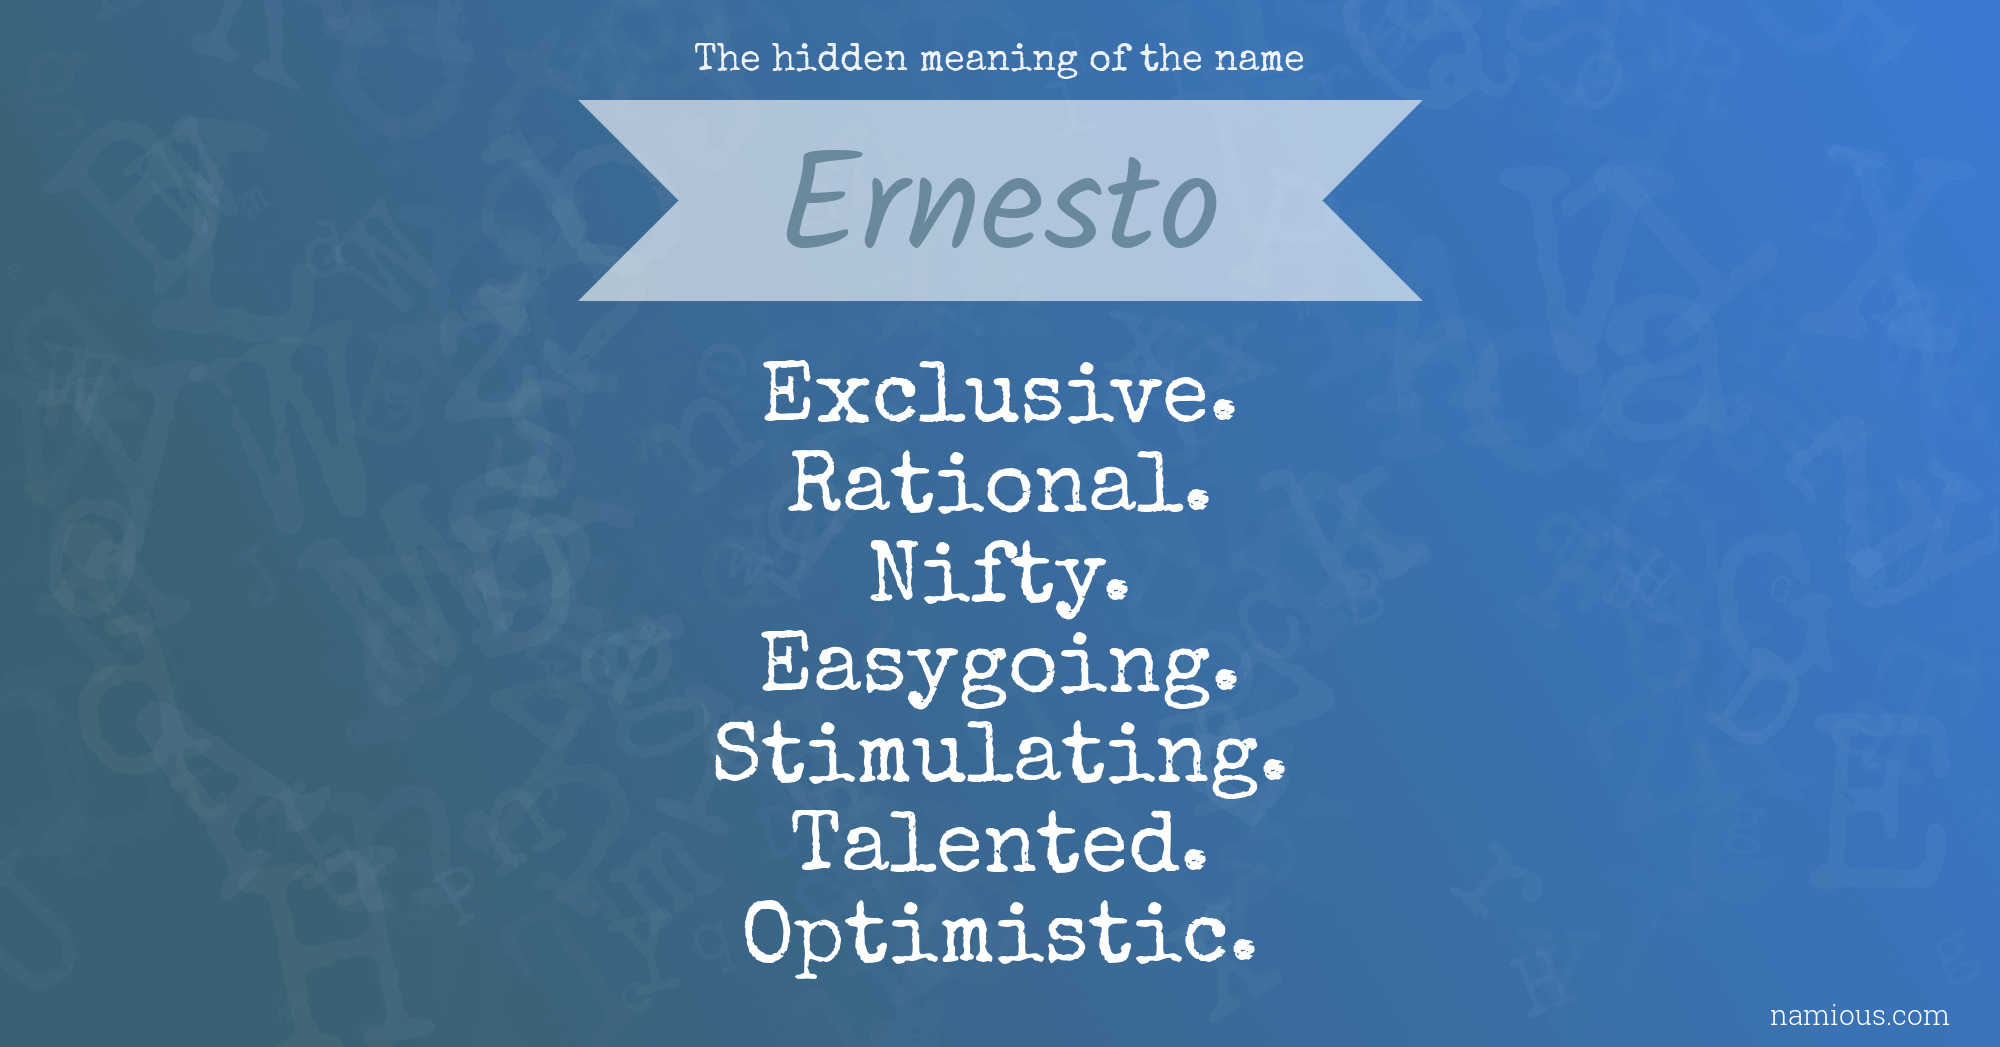 The hidden meaning of the name Ernesto